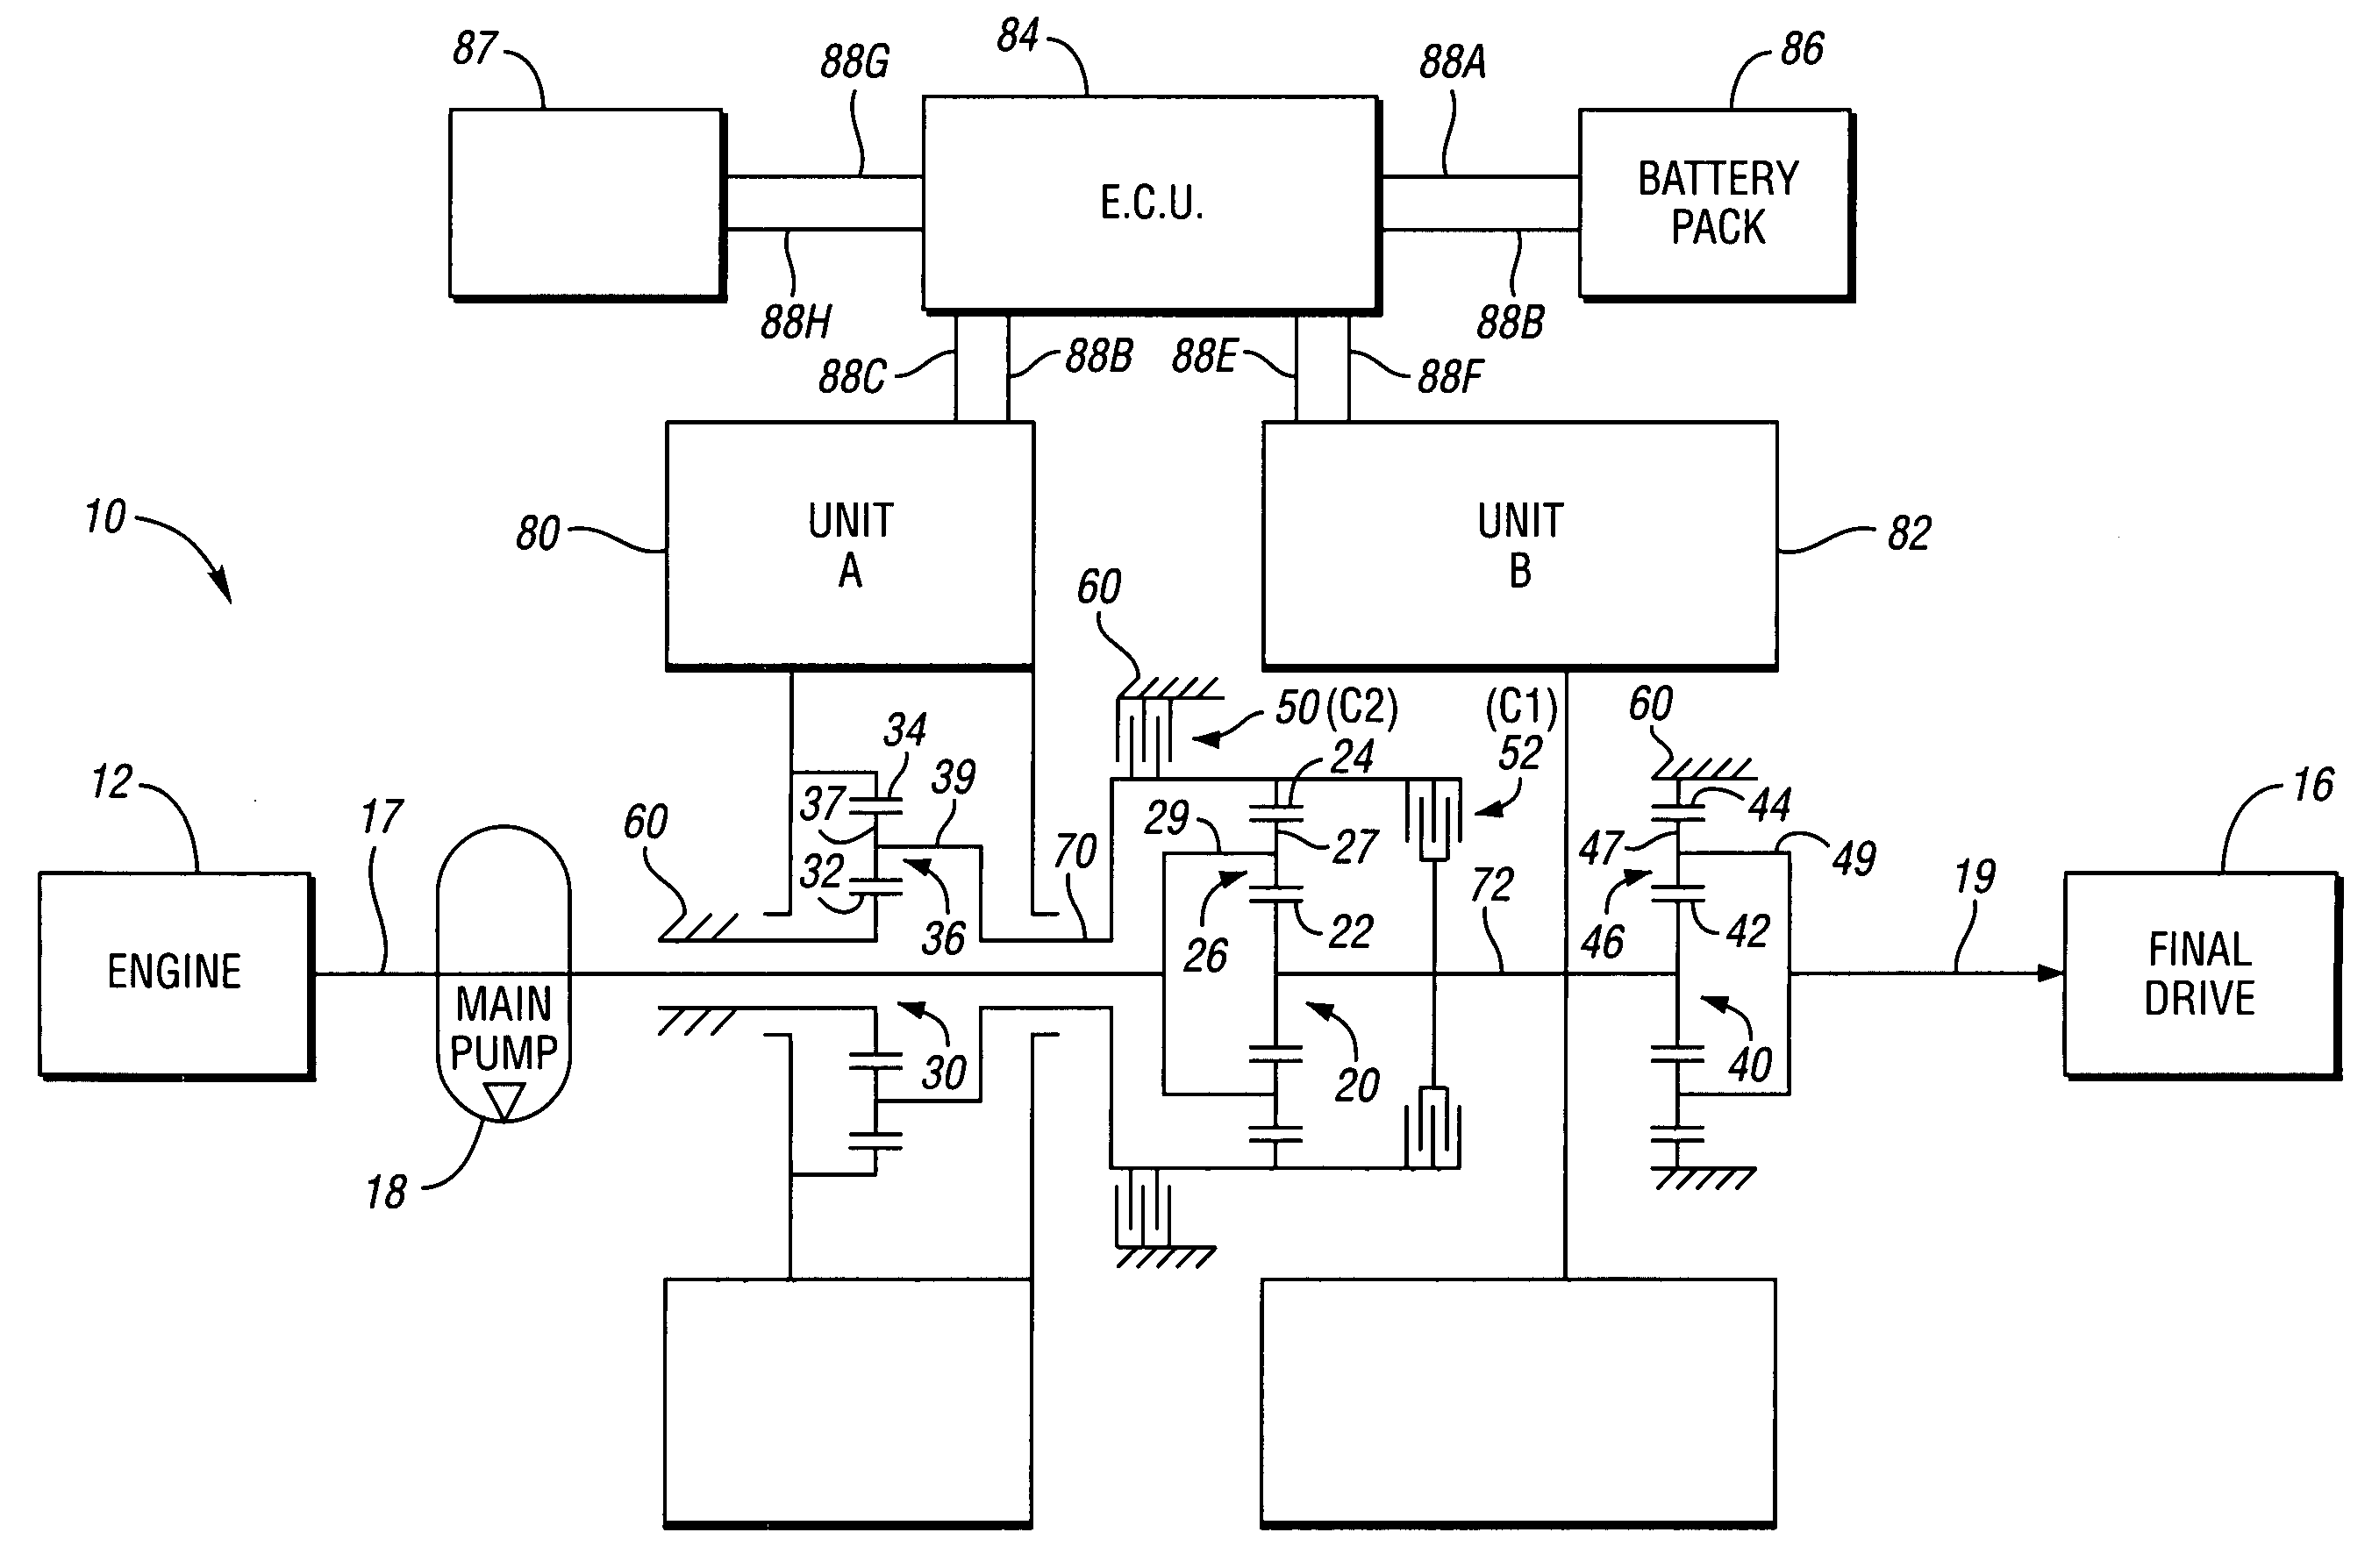 One-mode input-split electro-mechanical transmission with two fixed speed ratios